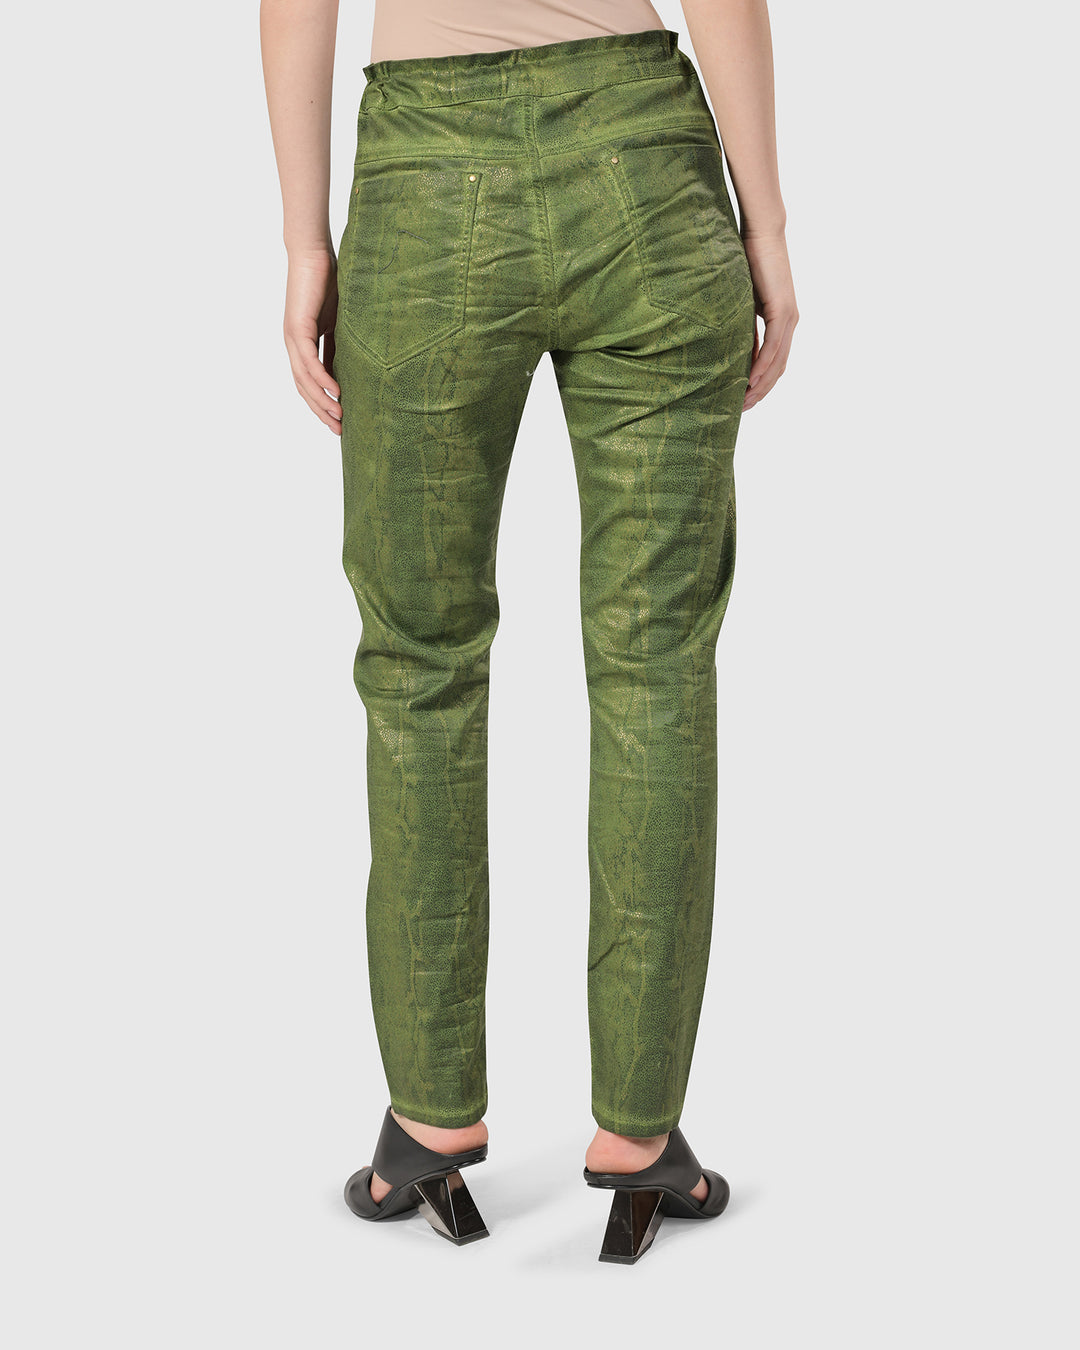 Fearless Iconic Stretch Jeans, Green